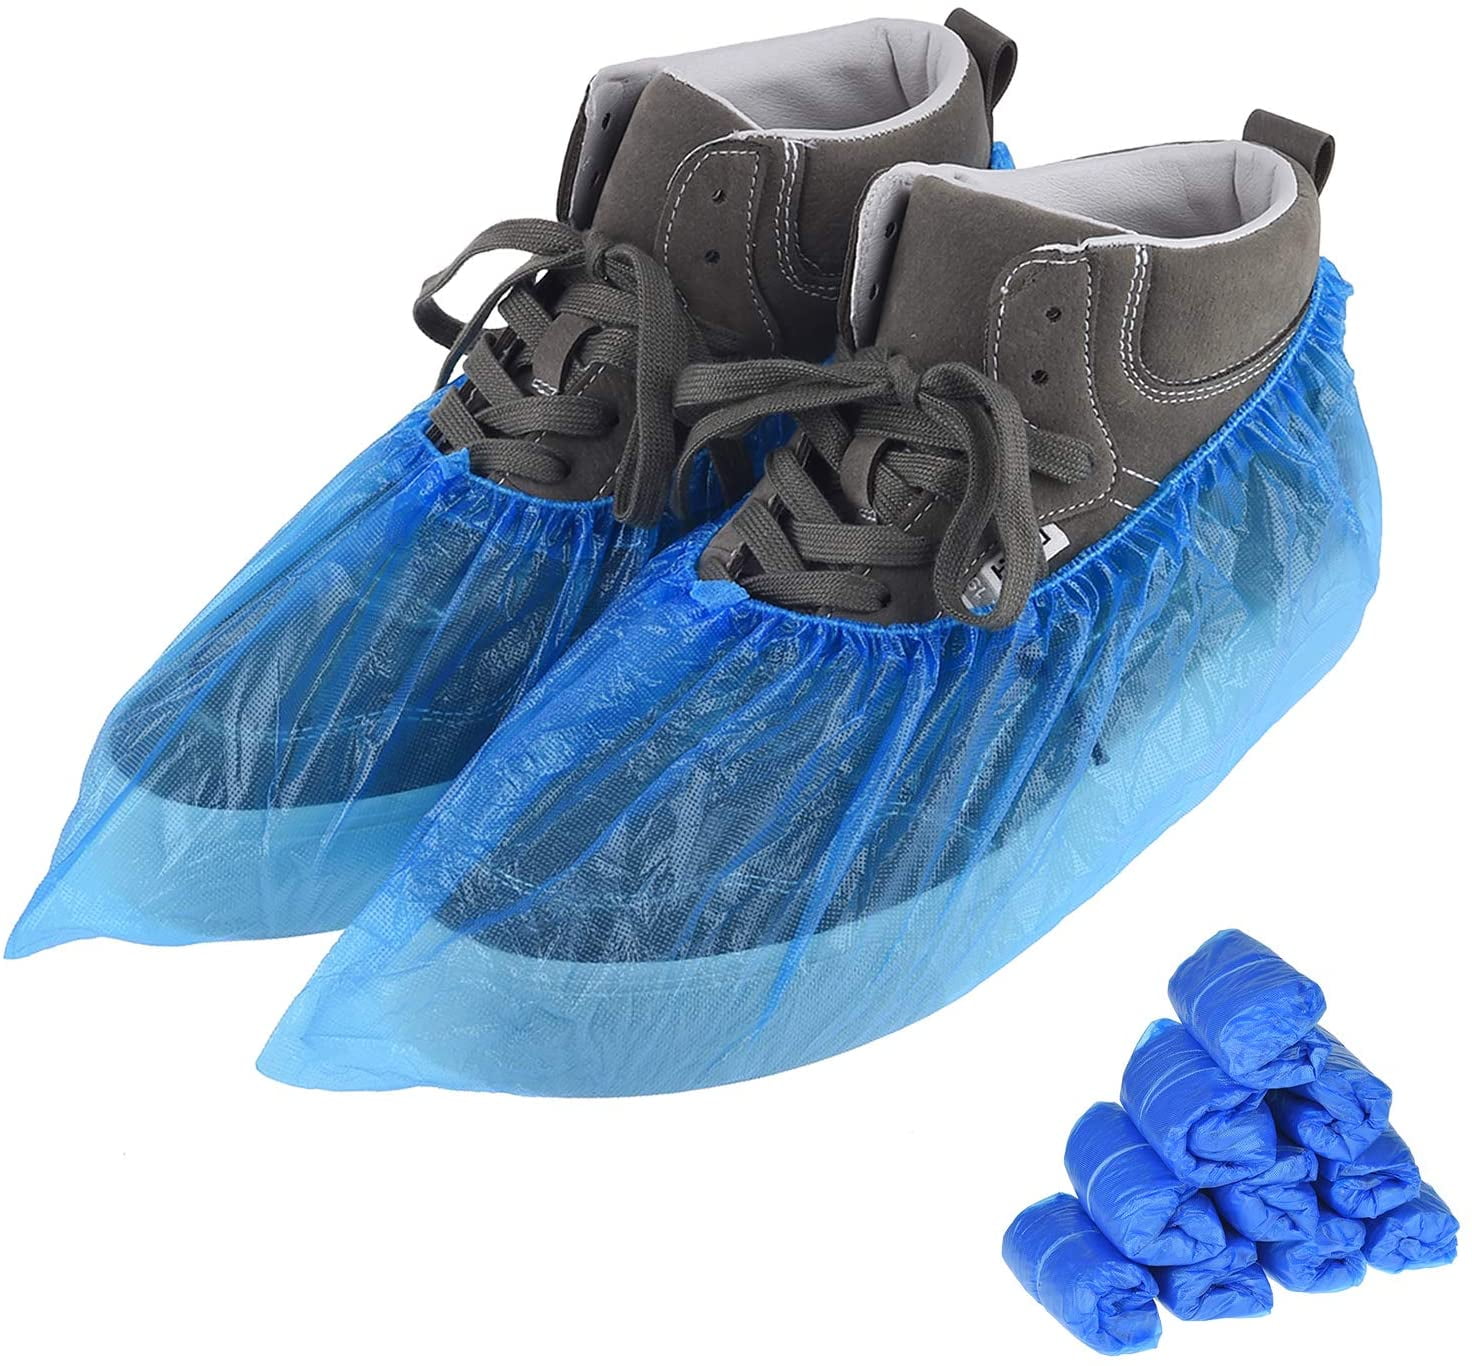 Shoes Insoles & Accessories Shoe Care & Cleaning Disposable Overshoes Shoe Covers Anti Slip Cleaning Protective Safety 